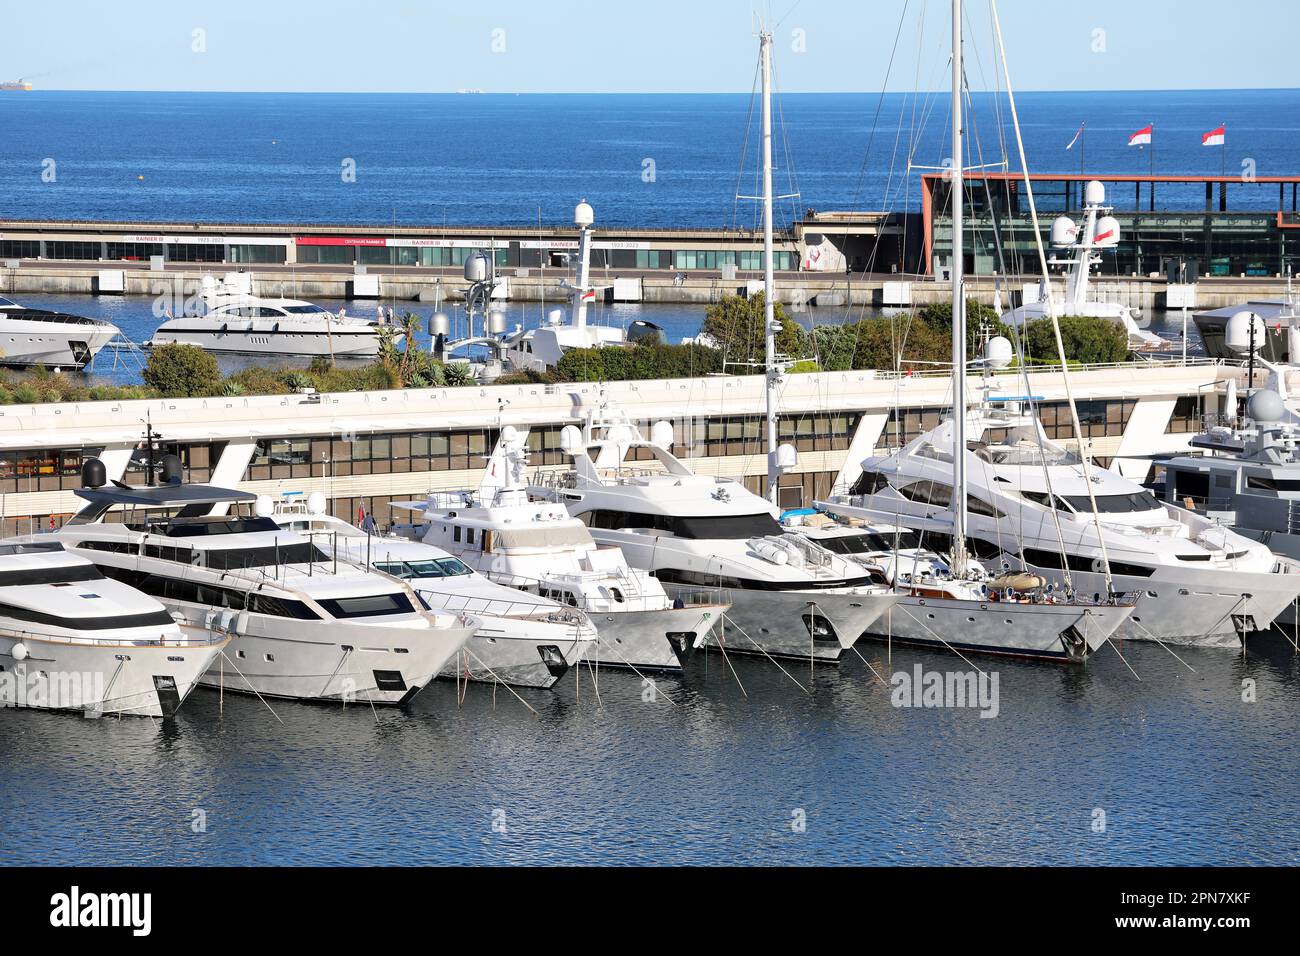 Monte-Carlo, Monaco - April 16, 2023: Aerial view of luxurious superyachts lined up at Port Hercule in Monte-Carlo, Monaco, prior to the Formula 1 Gra Stock Photo